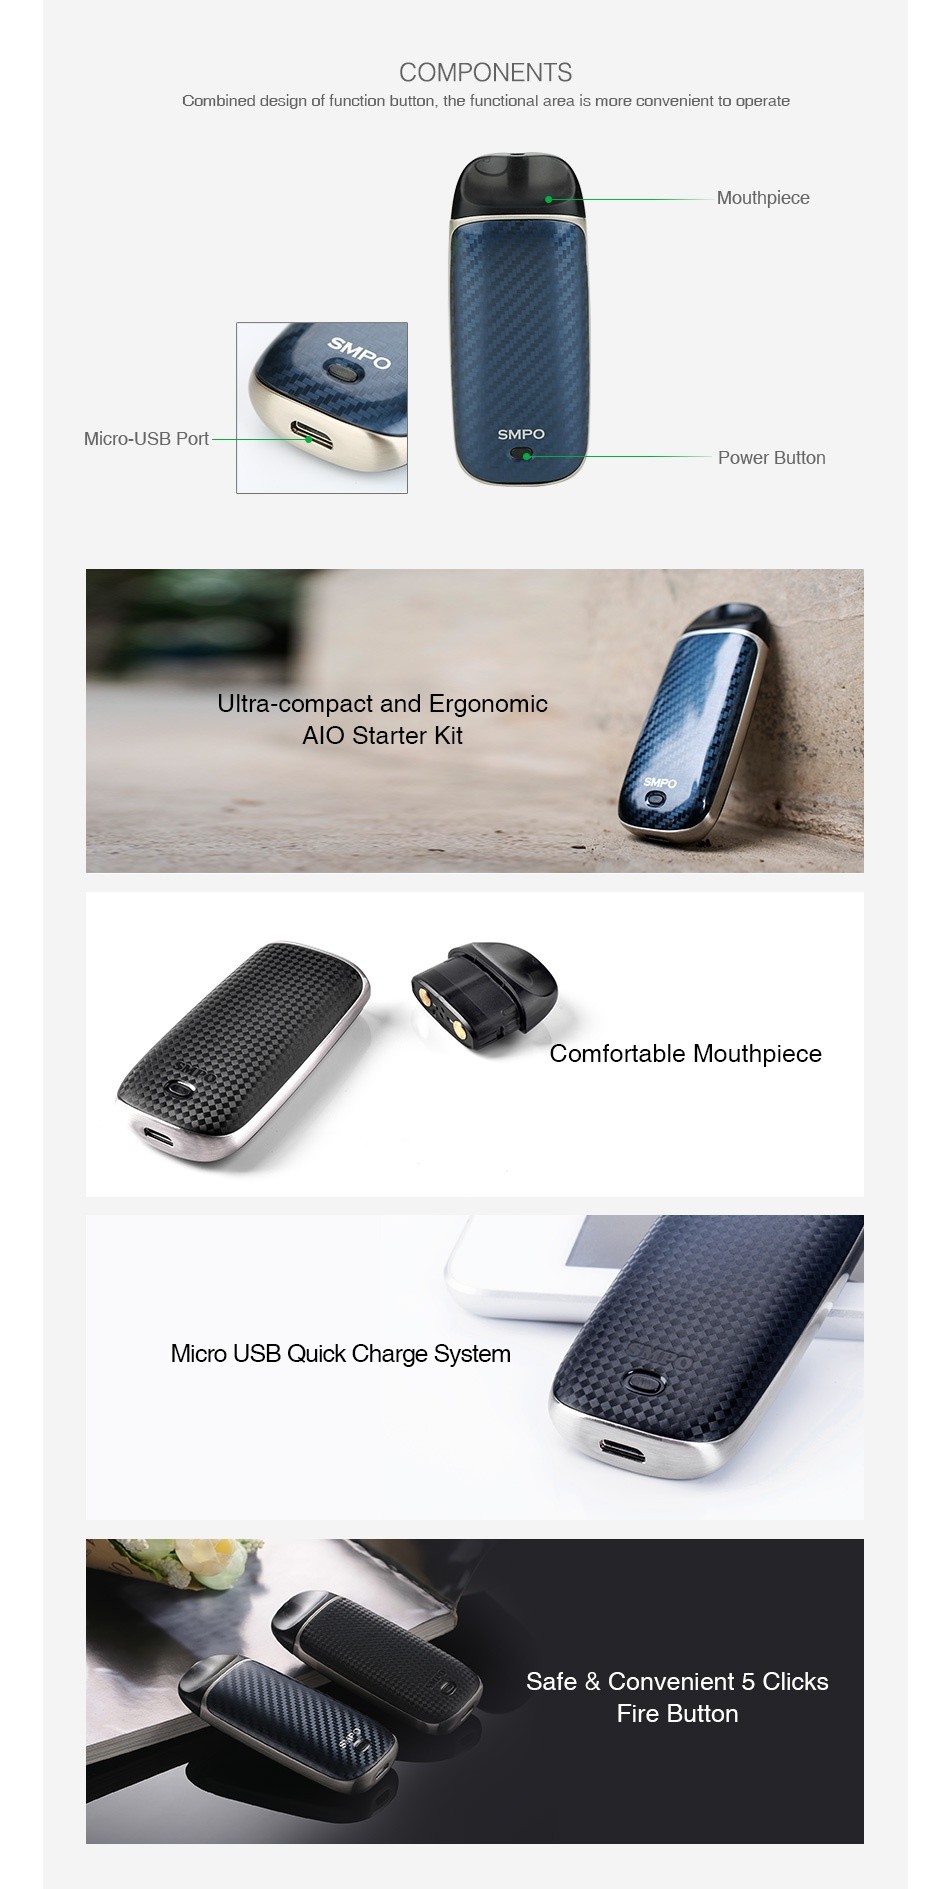 SMPO AIO Starter Kit 650mAh COMPONENTS Combined desian of function button the functional area is more convenient to operate Mouthpiece Micro USB Port Power button Ultra compact and Ergonomic Alo Starter Kit Comfortable Mouthpiece Micro USB Quick Charge System Safe convenient 5 clicks Fire button